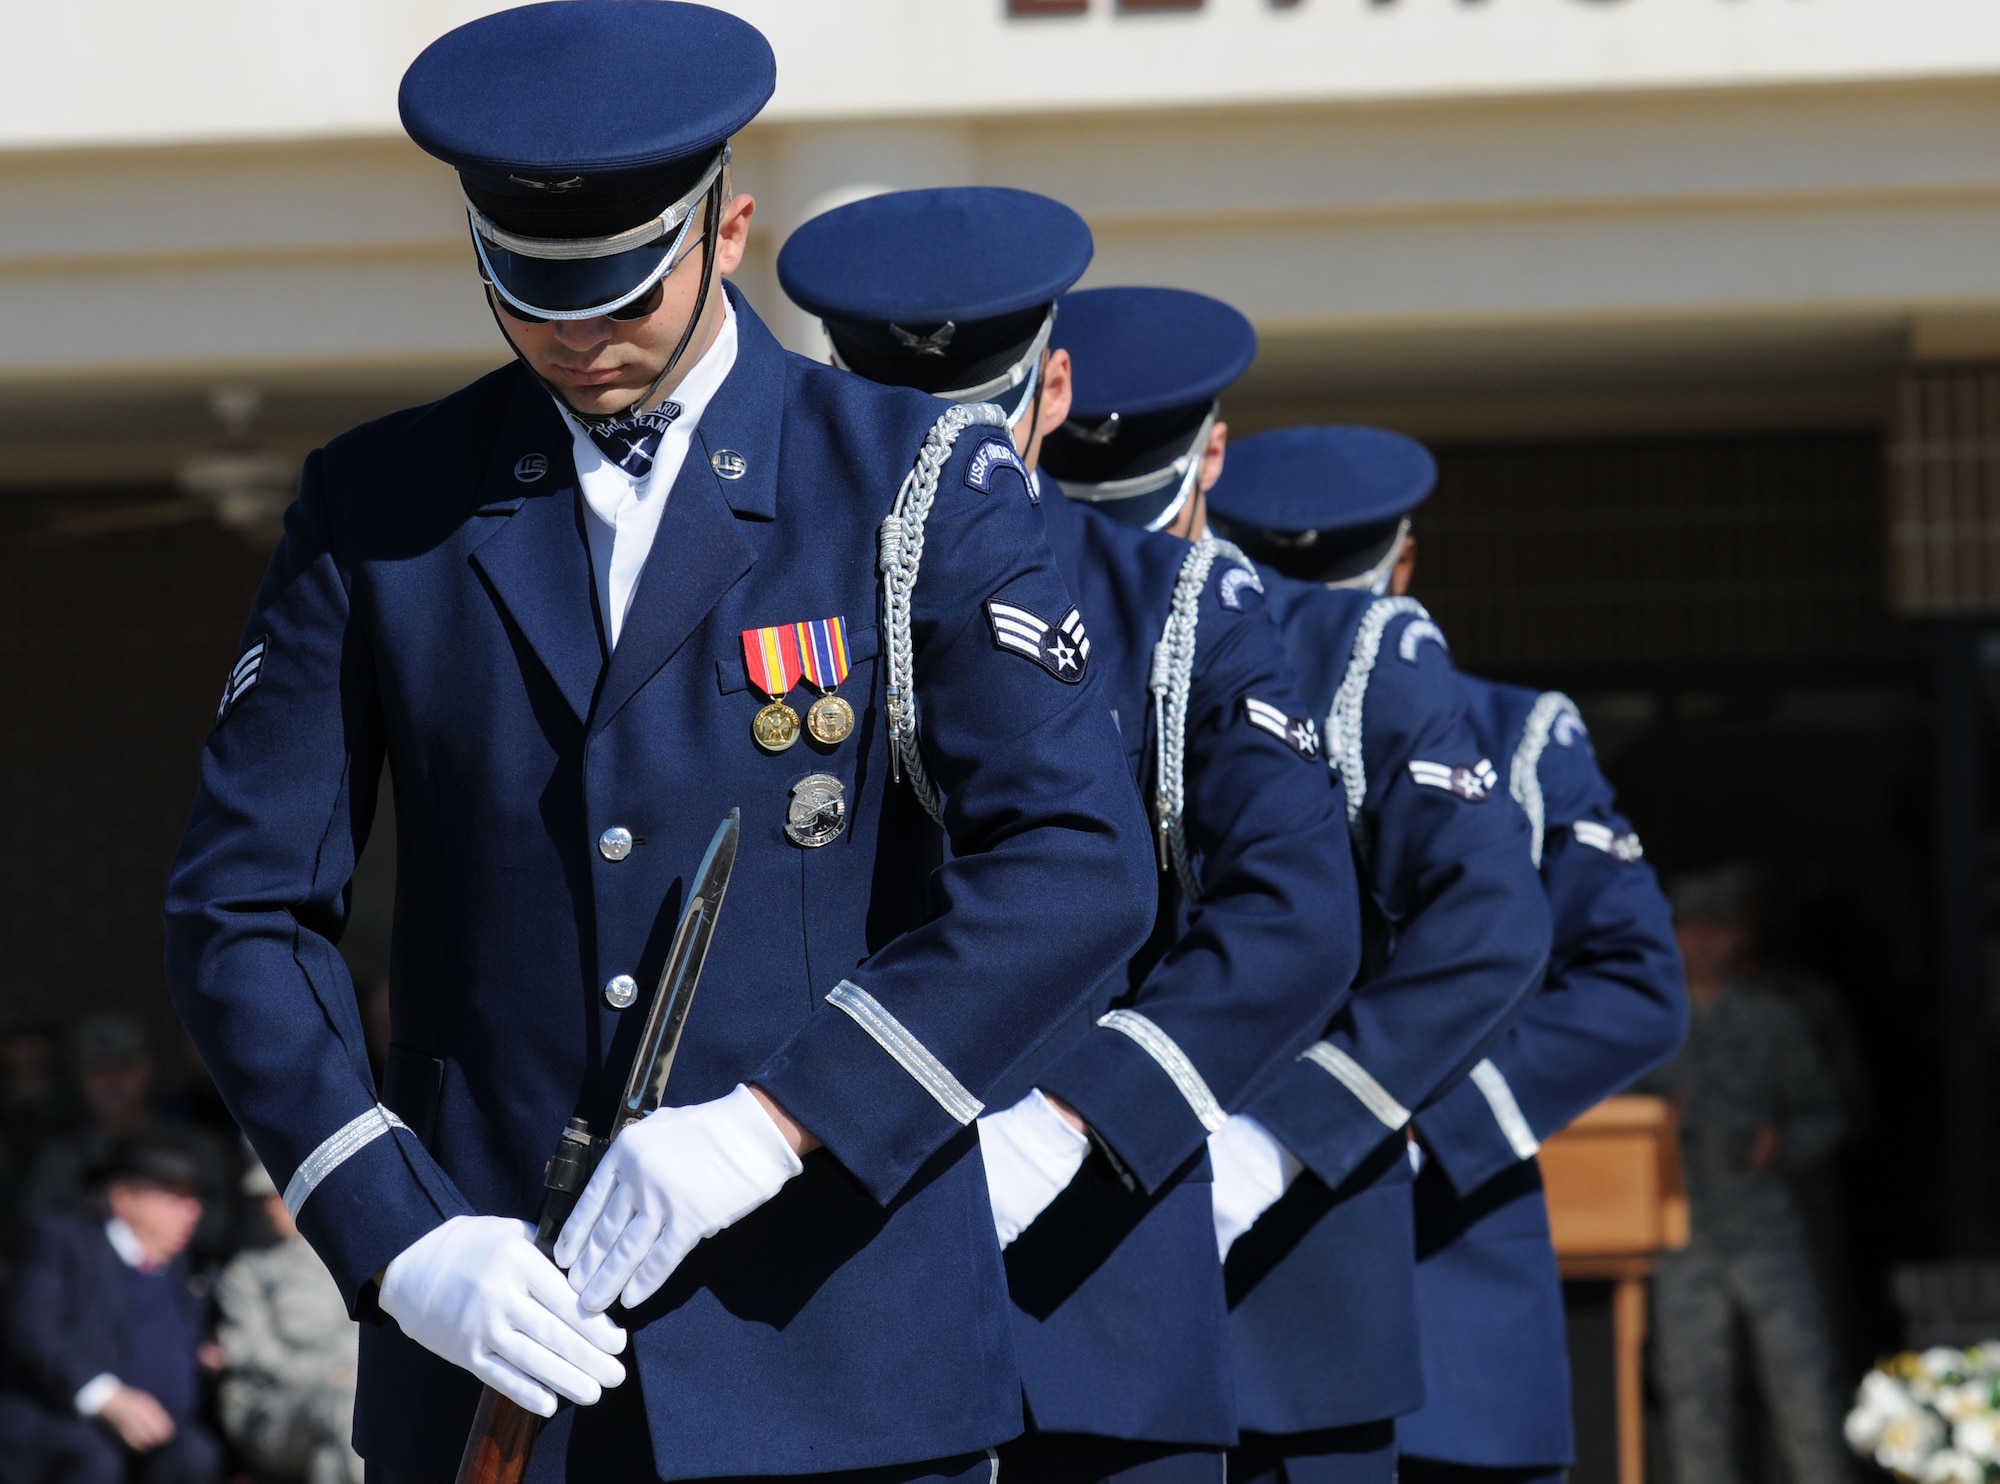 The U.S. Air Force Honor Guard Drill Team performs a new routine on the Levitow Training Support Facility drill pad Feb. 26, 2016, Keesler Air Force Base, Miss. During the past month, the team developed the routine to be used throughout the year. (U.S. Air Force photo by Kemberly Groue)